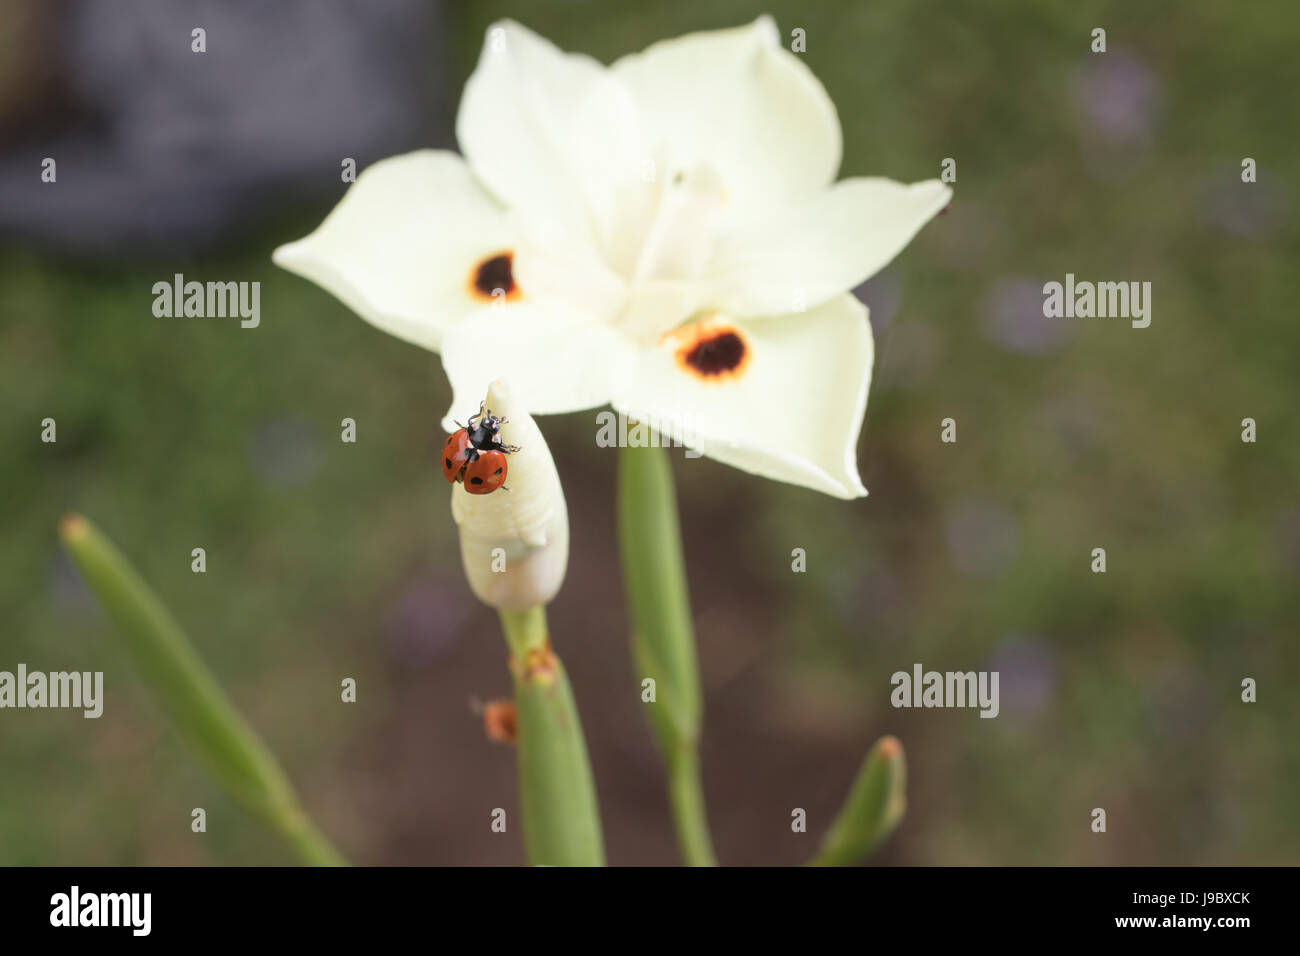 Red and black spotted Ladybug crawling on a yellow Dietes flower in a garden Stock Photo